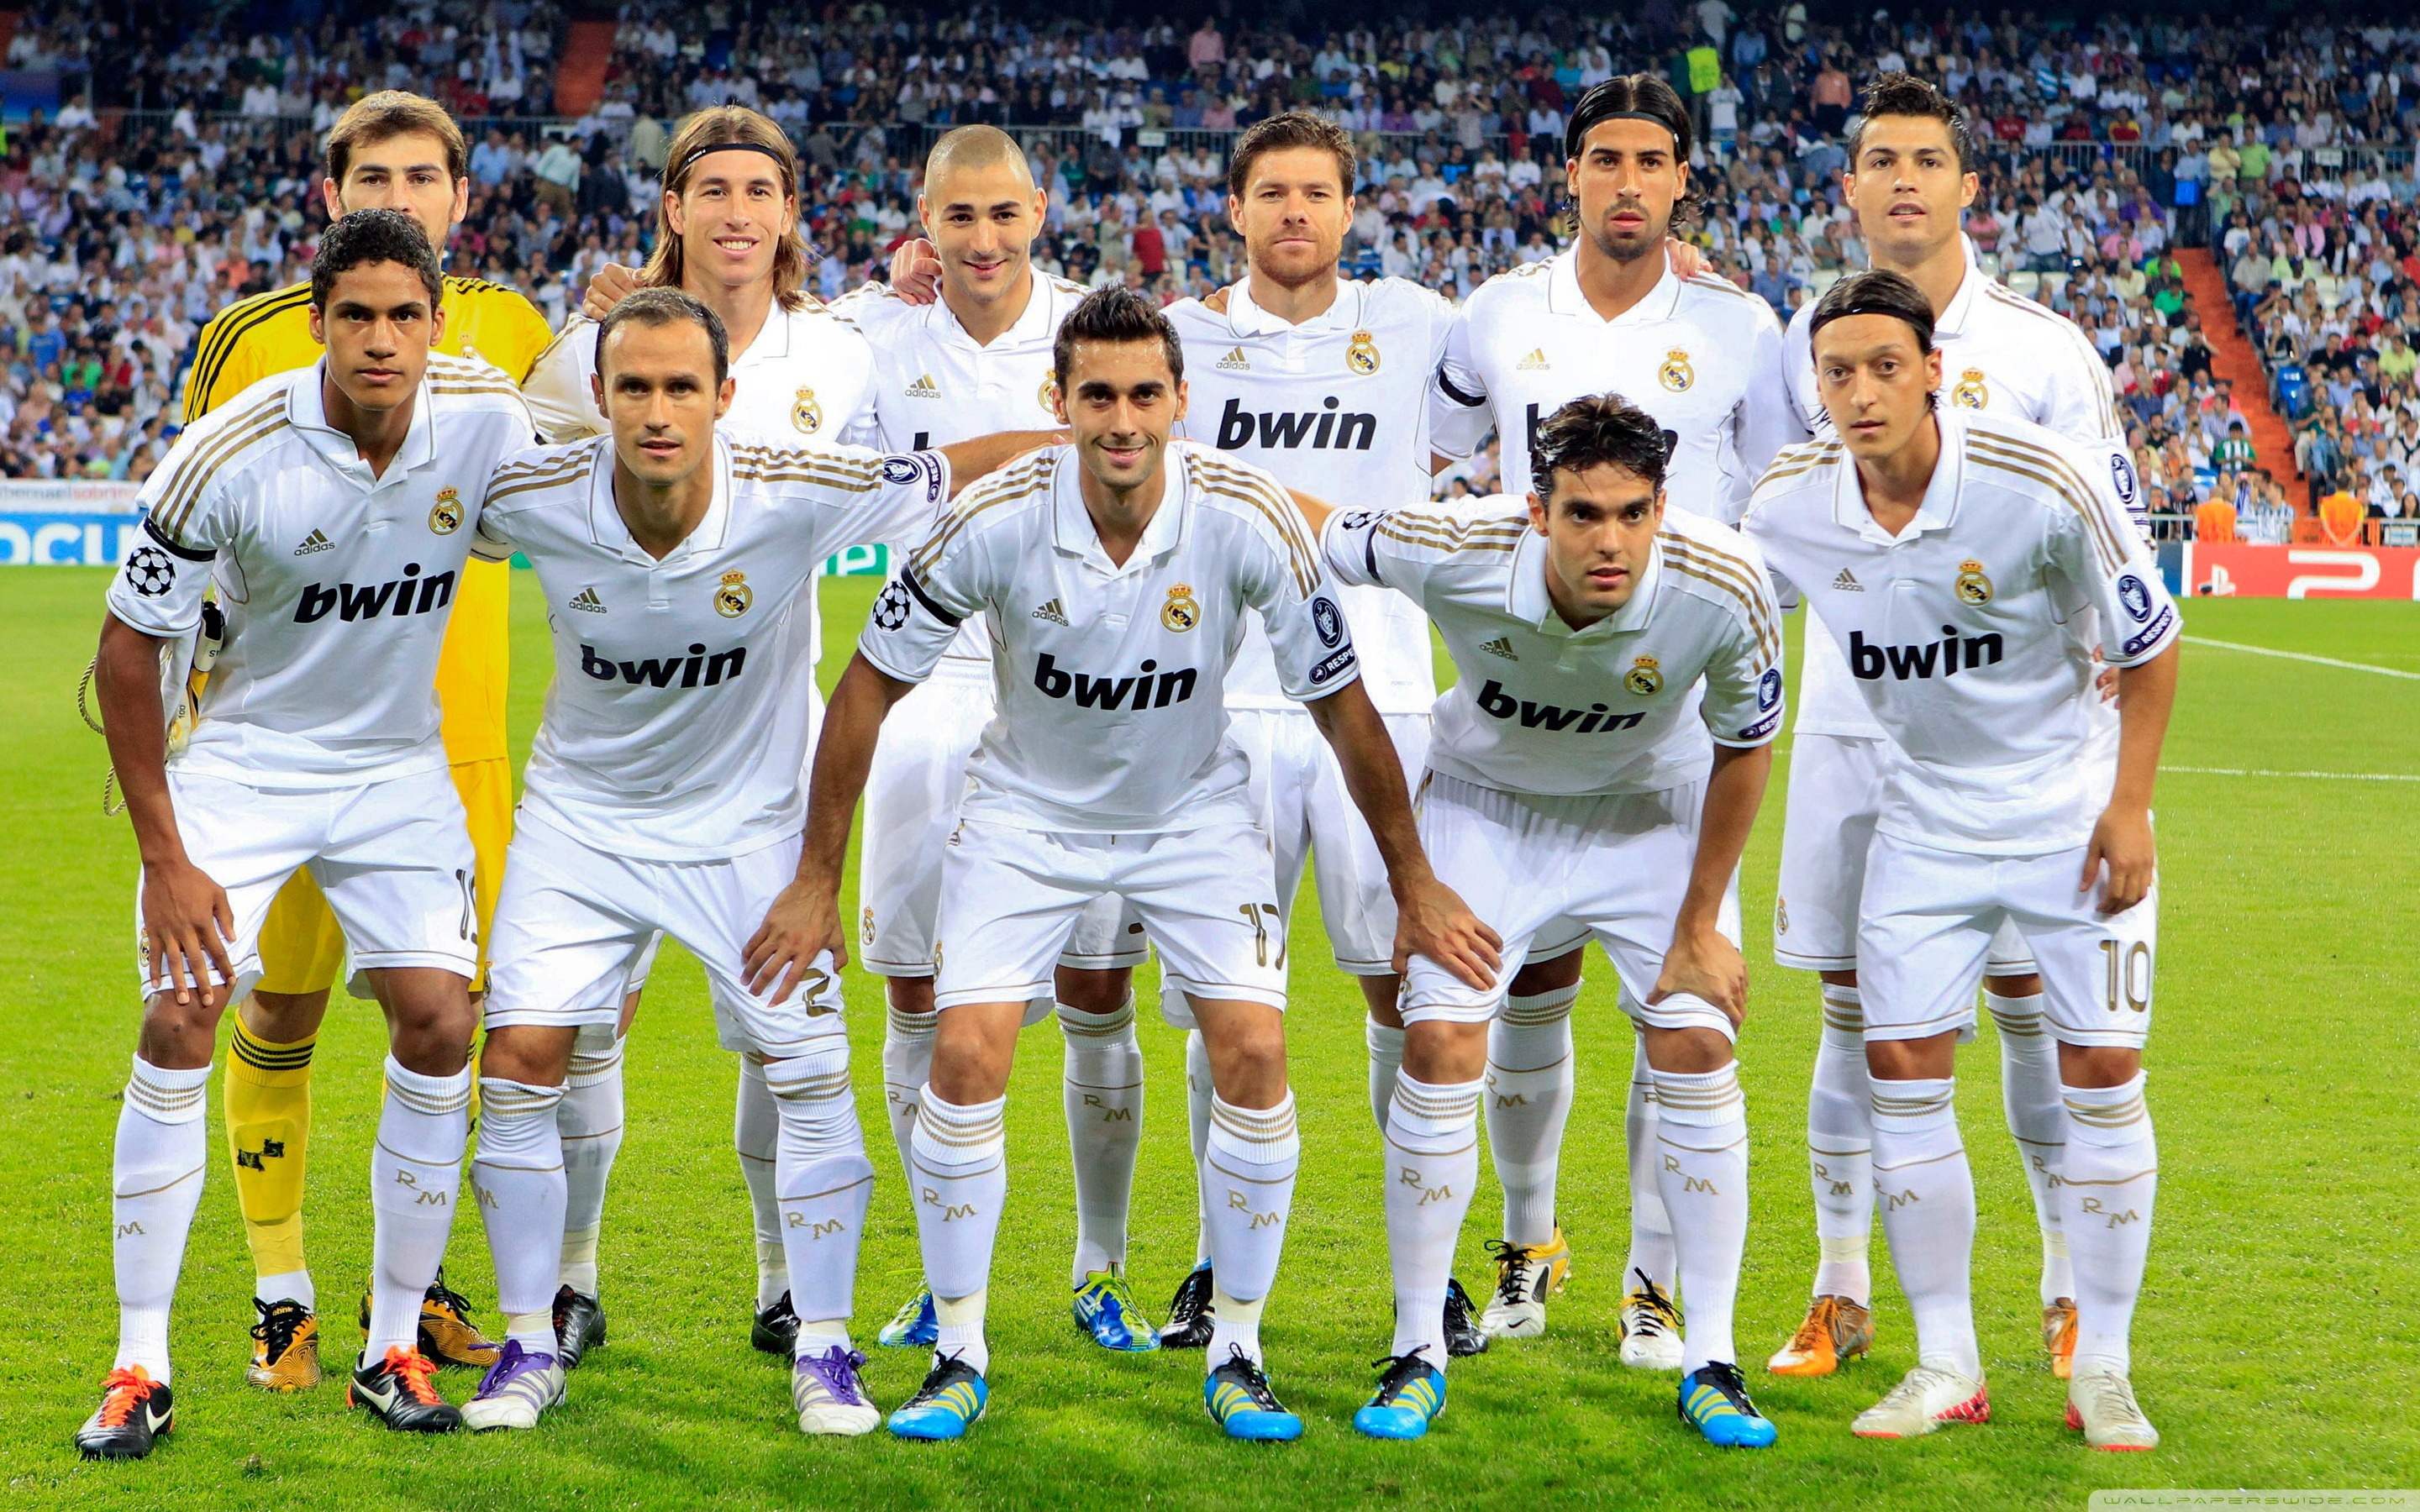 Real Madrid wallpapers and images - wallpapers, pictures ...